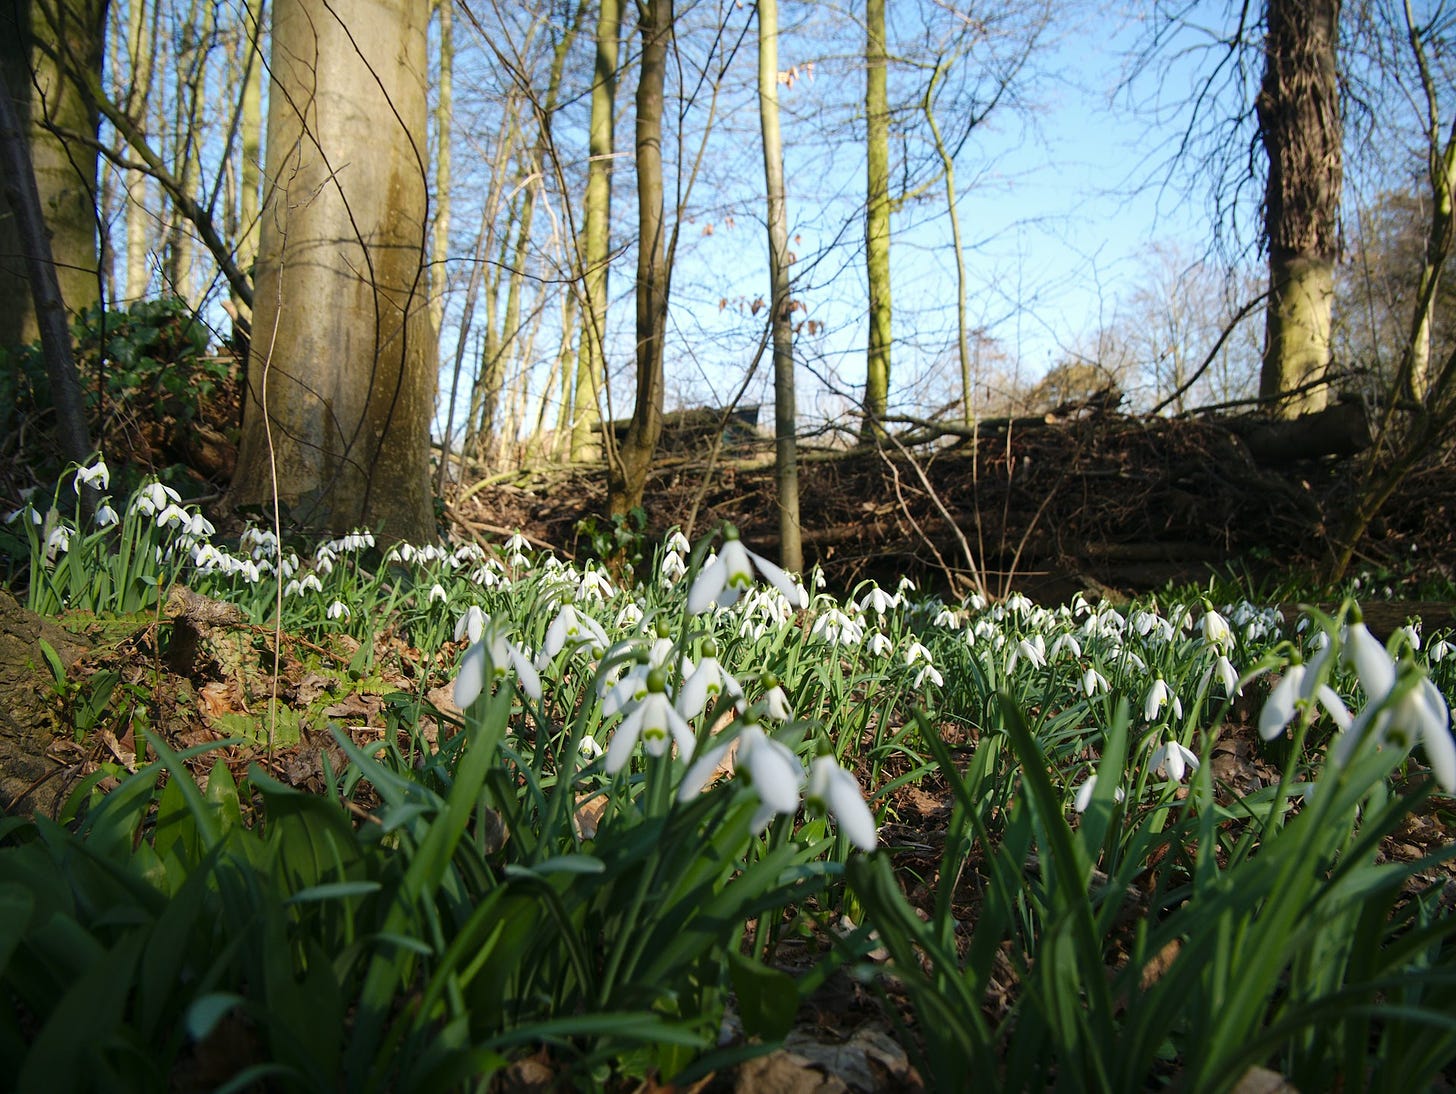 A wood with pale blue sky, thin trees with bare Winter branches and a bed of snowdrops on the ground